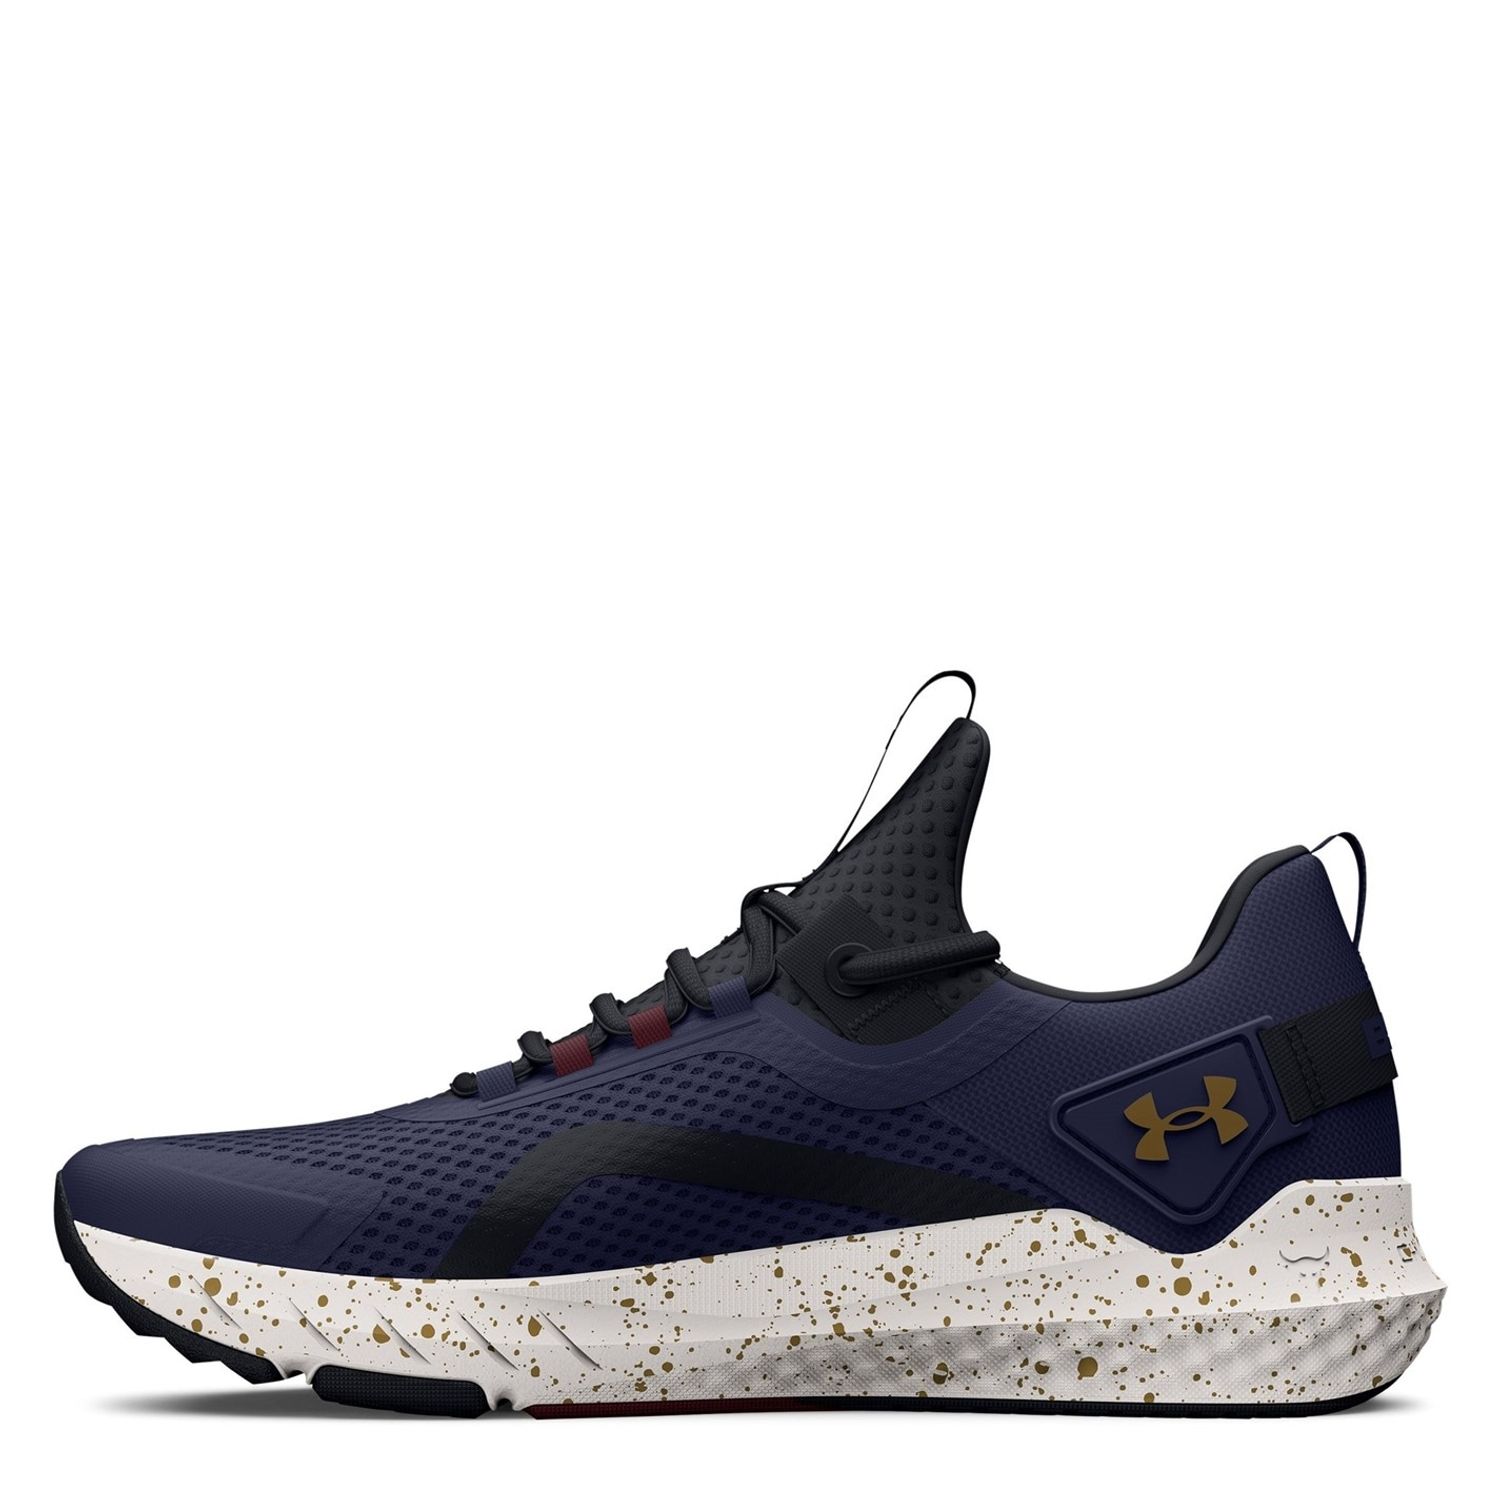 Under Armour Mens Project Rock BSR 3 Training Shoes